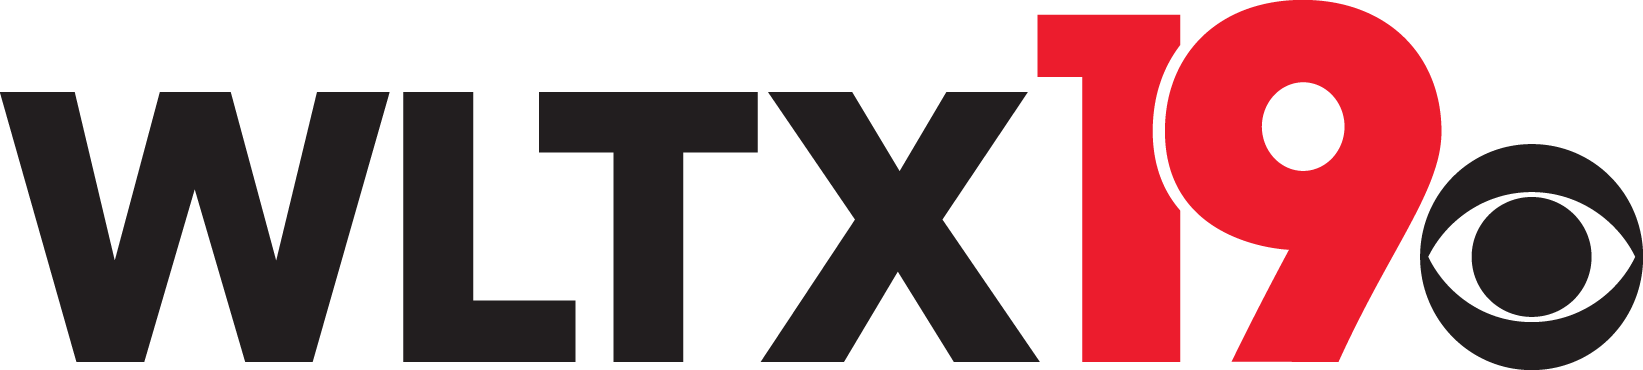 Logo for WLTX News 19.  The letters WLTX appear in bold black font.  The number 19 is bold and red.  The CBS eye logo appears at the end.  